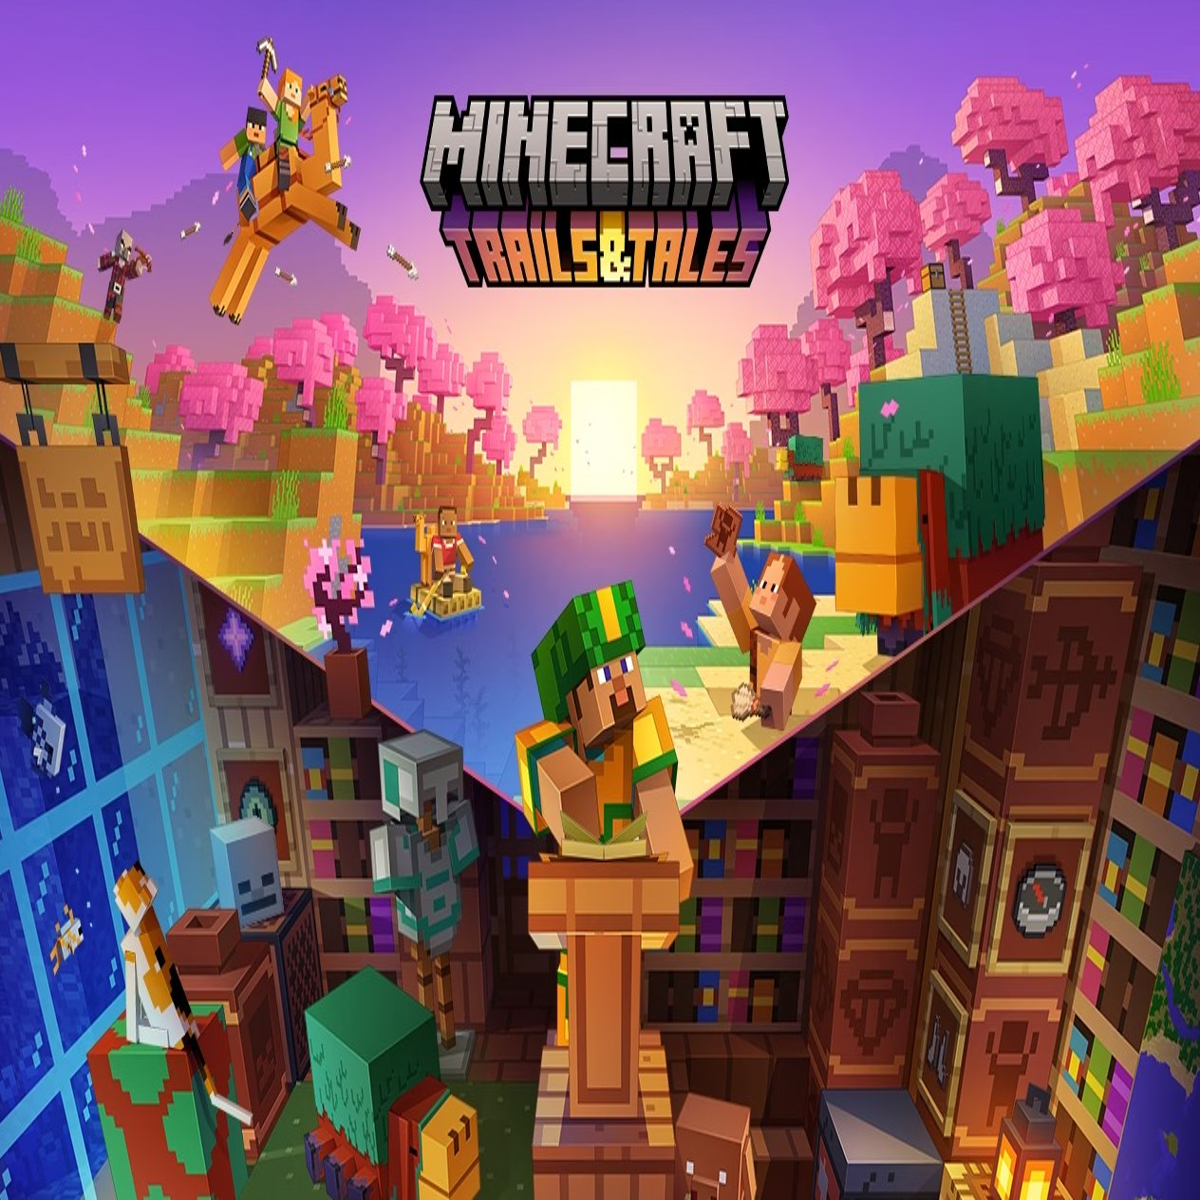 Petition to make this the new minecraft logo : r/gaming